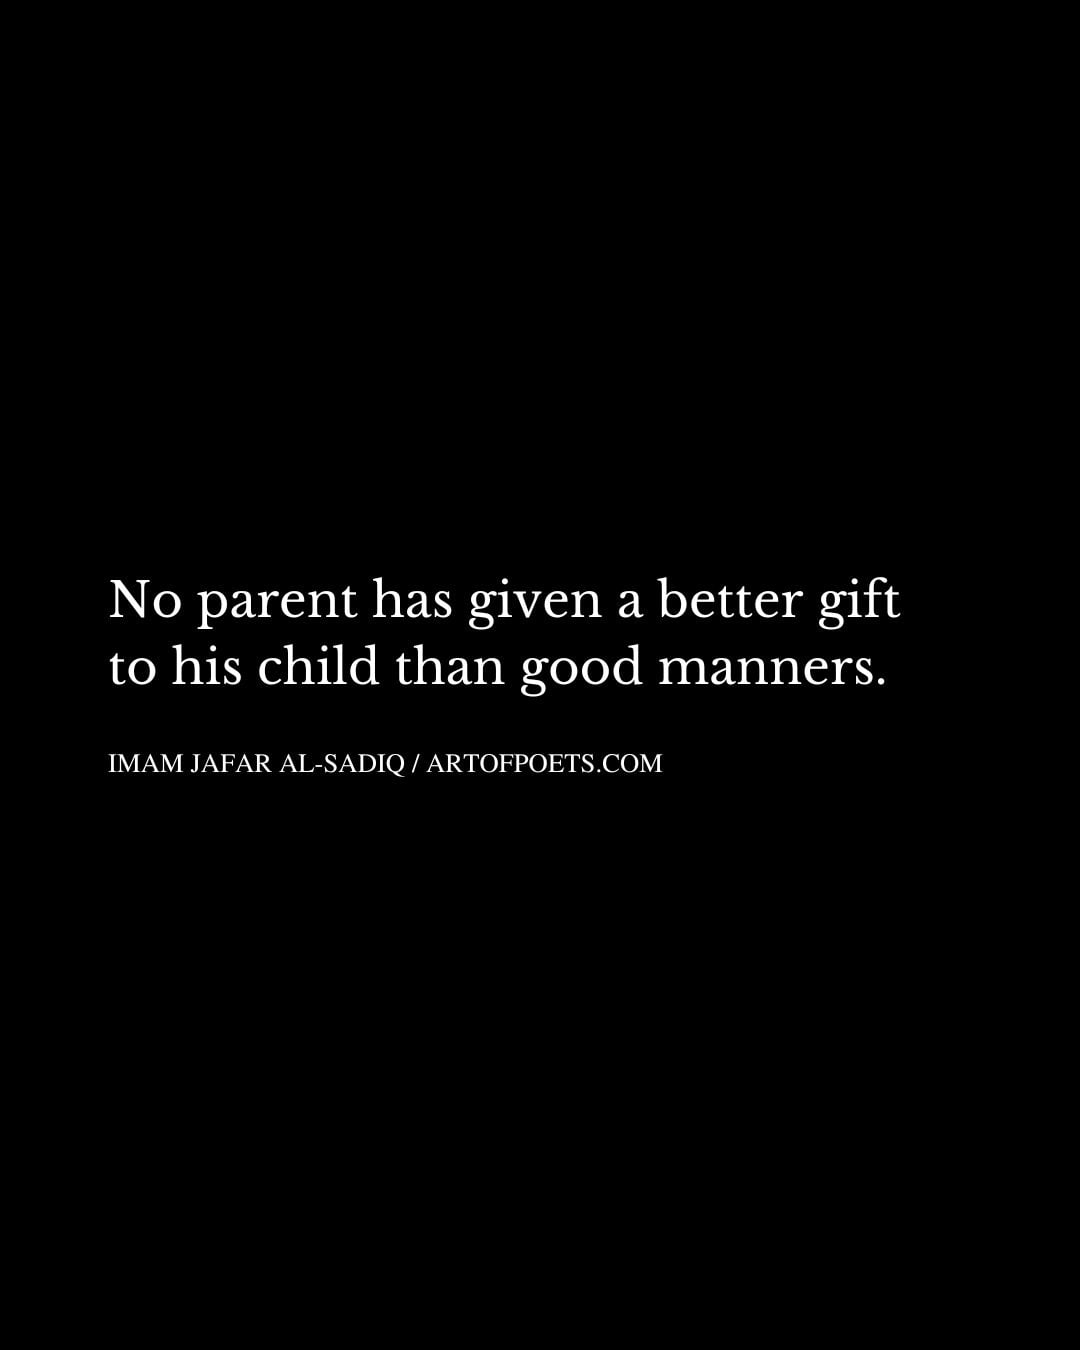 No parent has given a better gift to his child than good manners